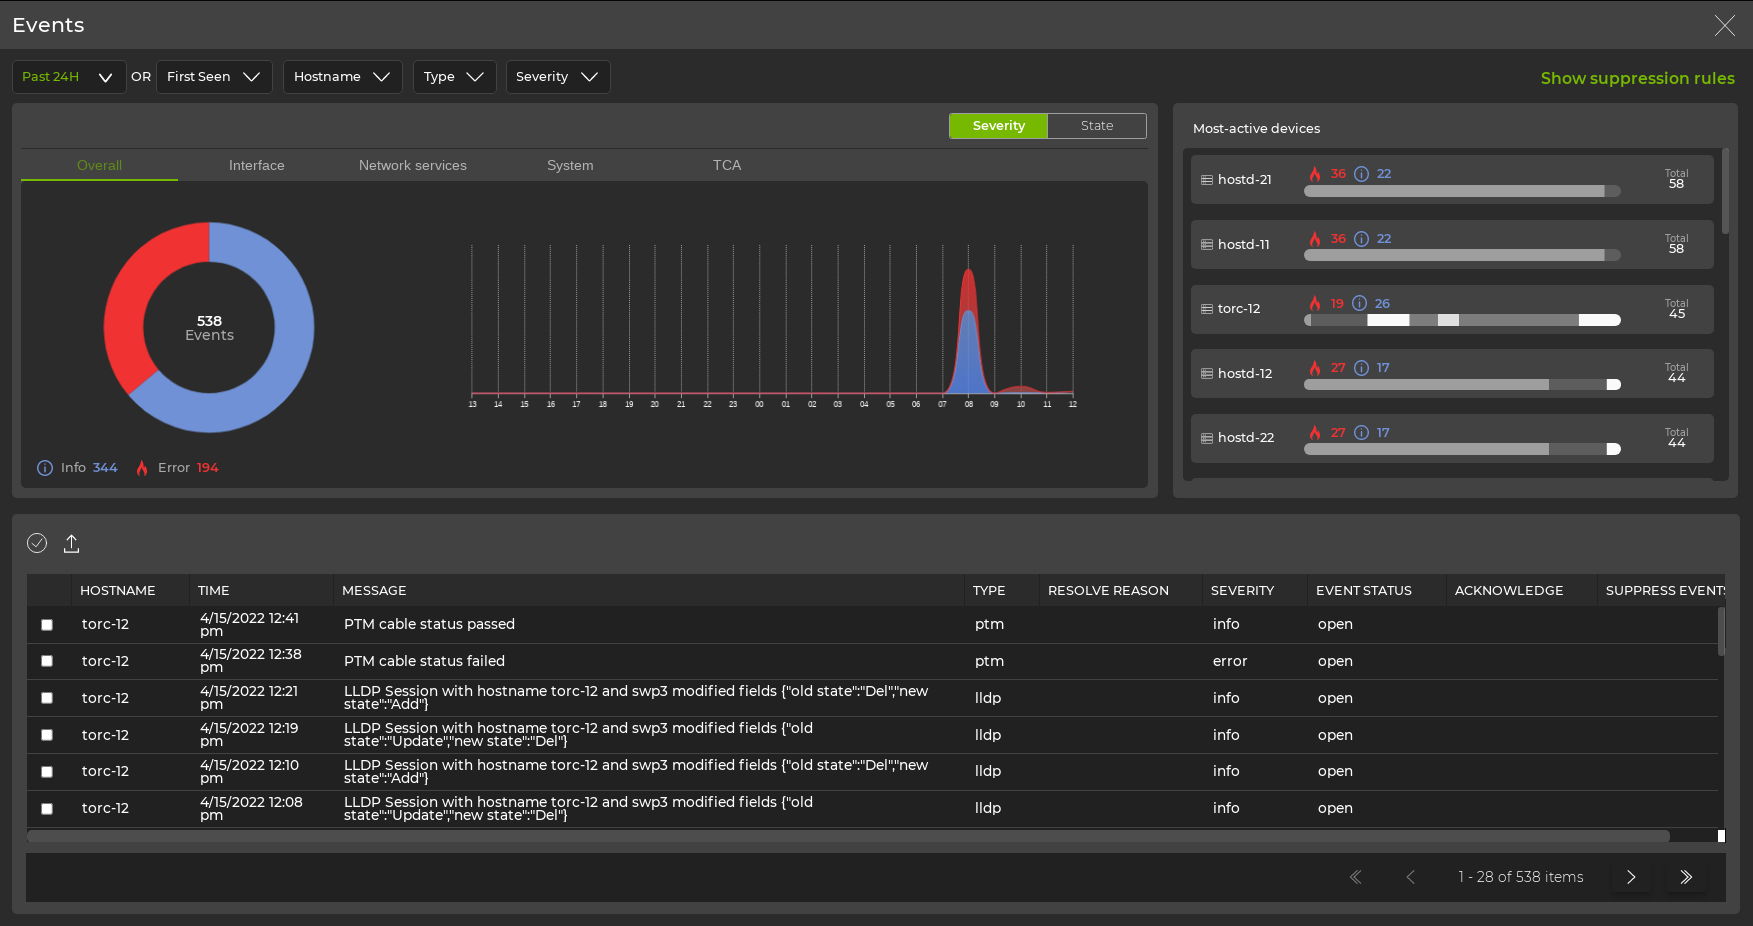 Events dashboard with networkwide error and info events.